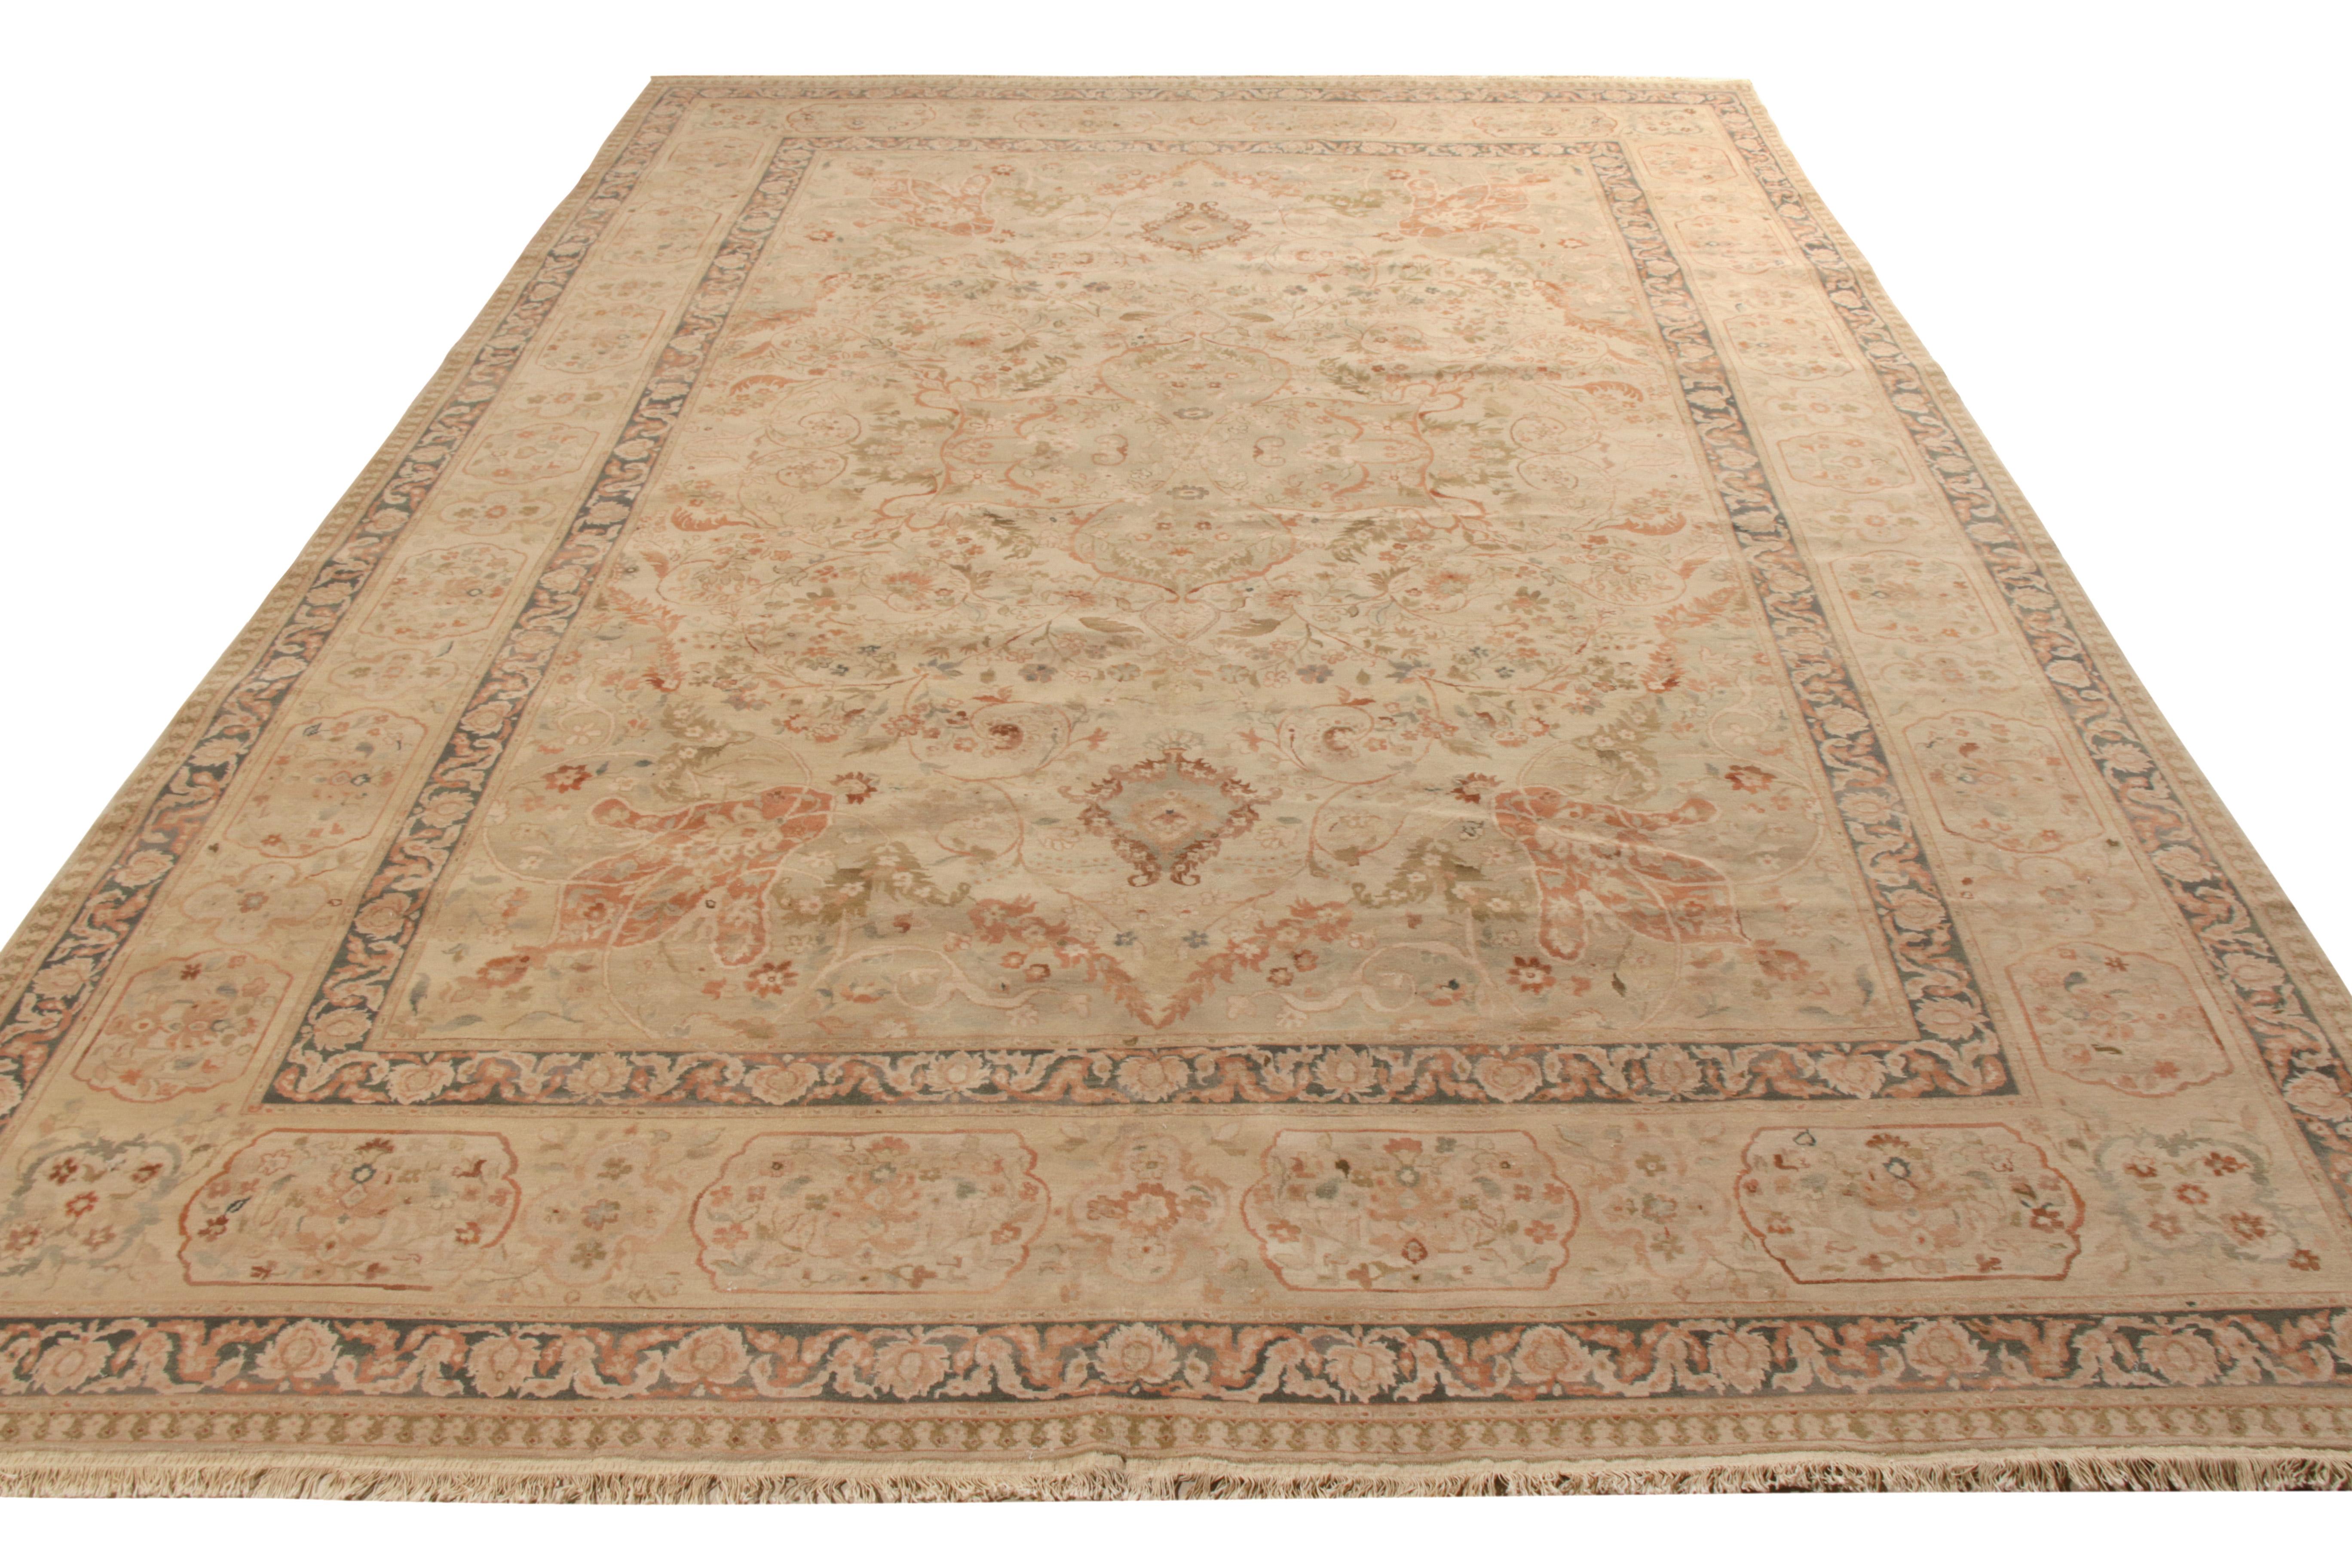 Hand knotted in wool, a 10x14 ode to celebrated Tabriz rug styles from Rug & Kilim’s Modern Classics Collection. Owning a contemporary take on classic Persian vibes, the rug witnesses a union of an elaborate floral pattern with comforting tones of